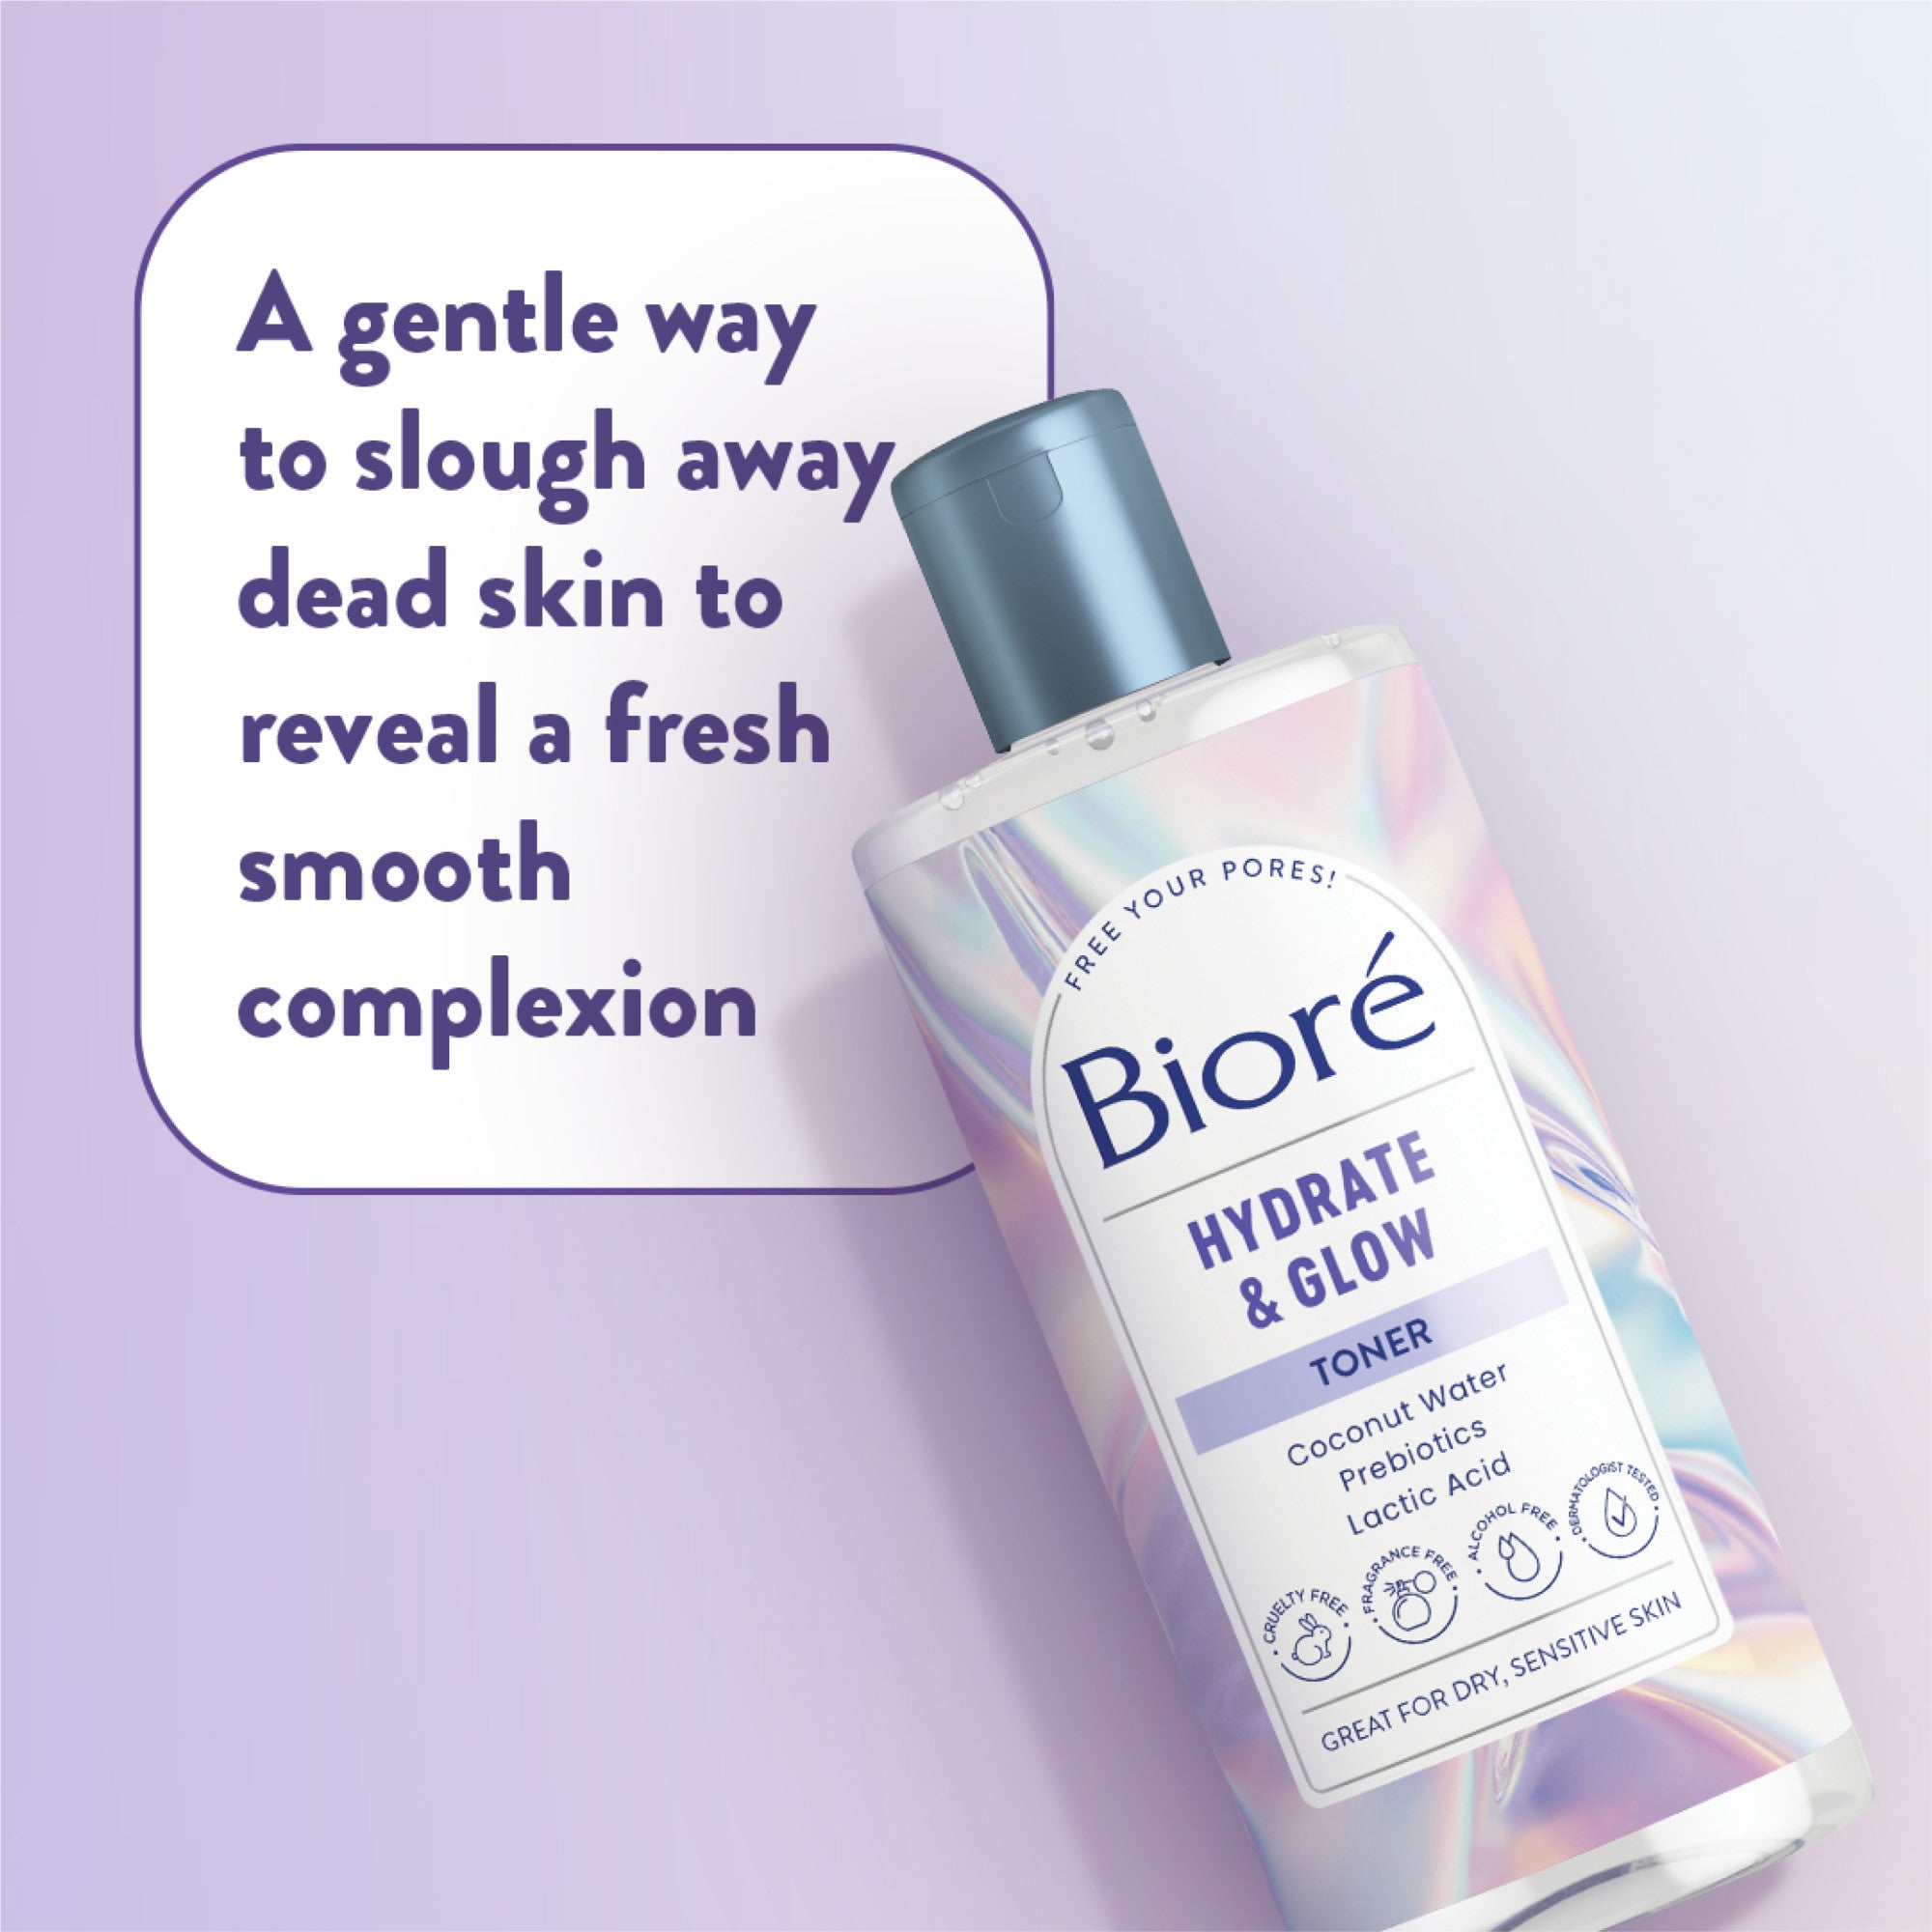 A gentle way to slough away dead skin to reveal a fresh smooth complexion.